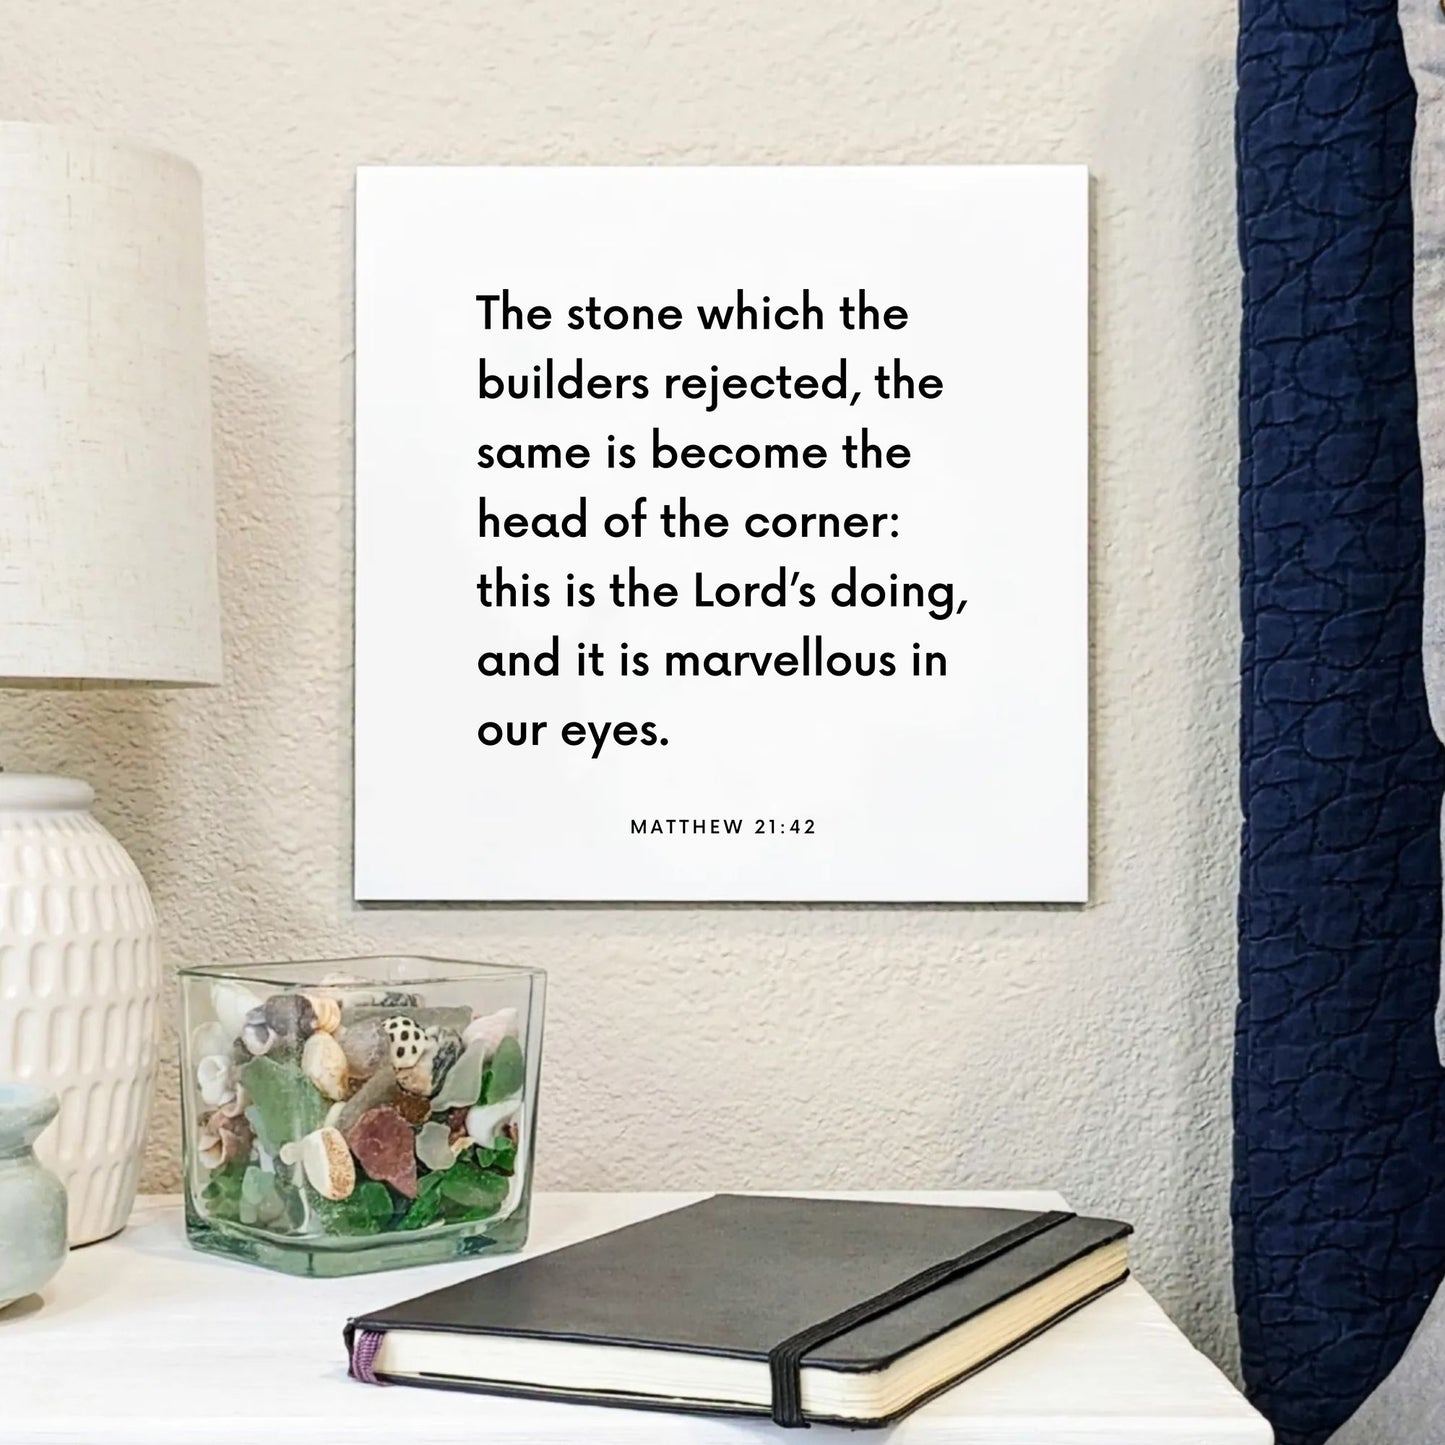 Bedside mouting of the scripture tile for Matthew 21:42 - "The stone which the builders rejected"